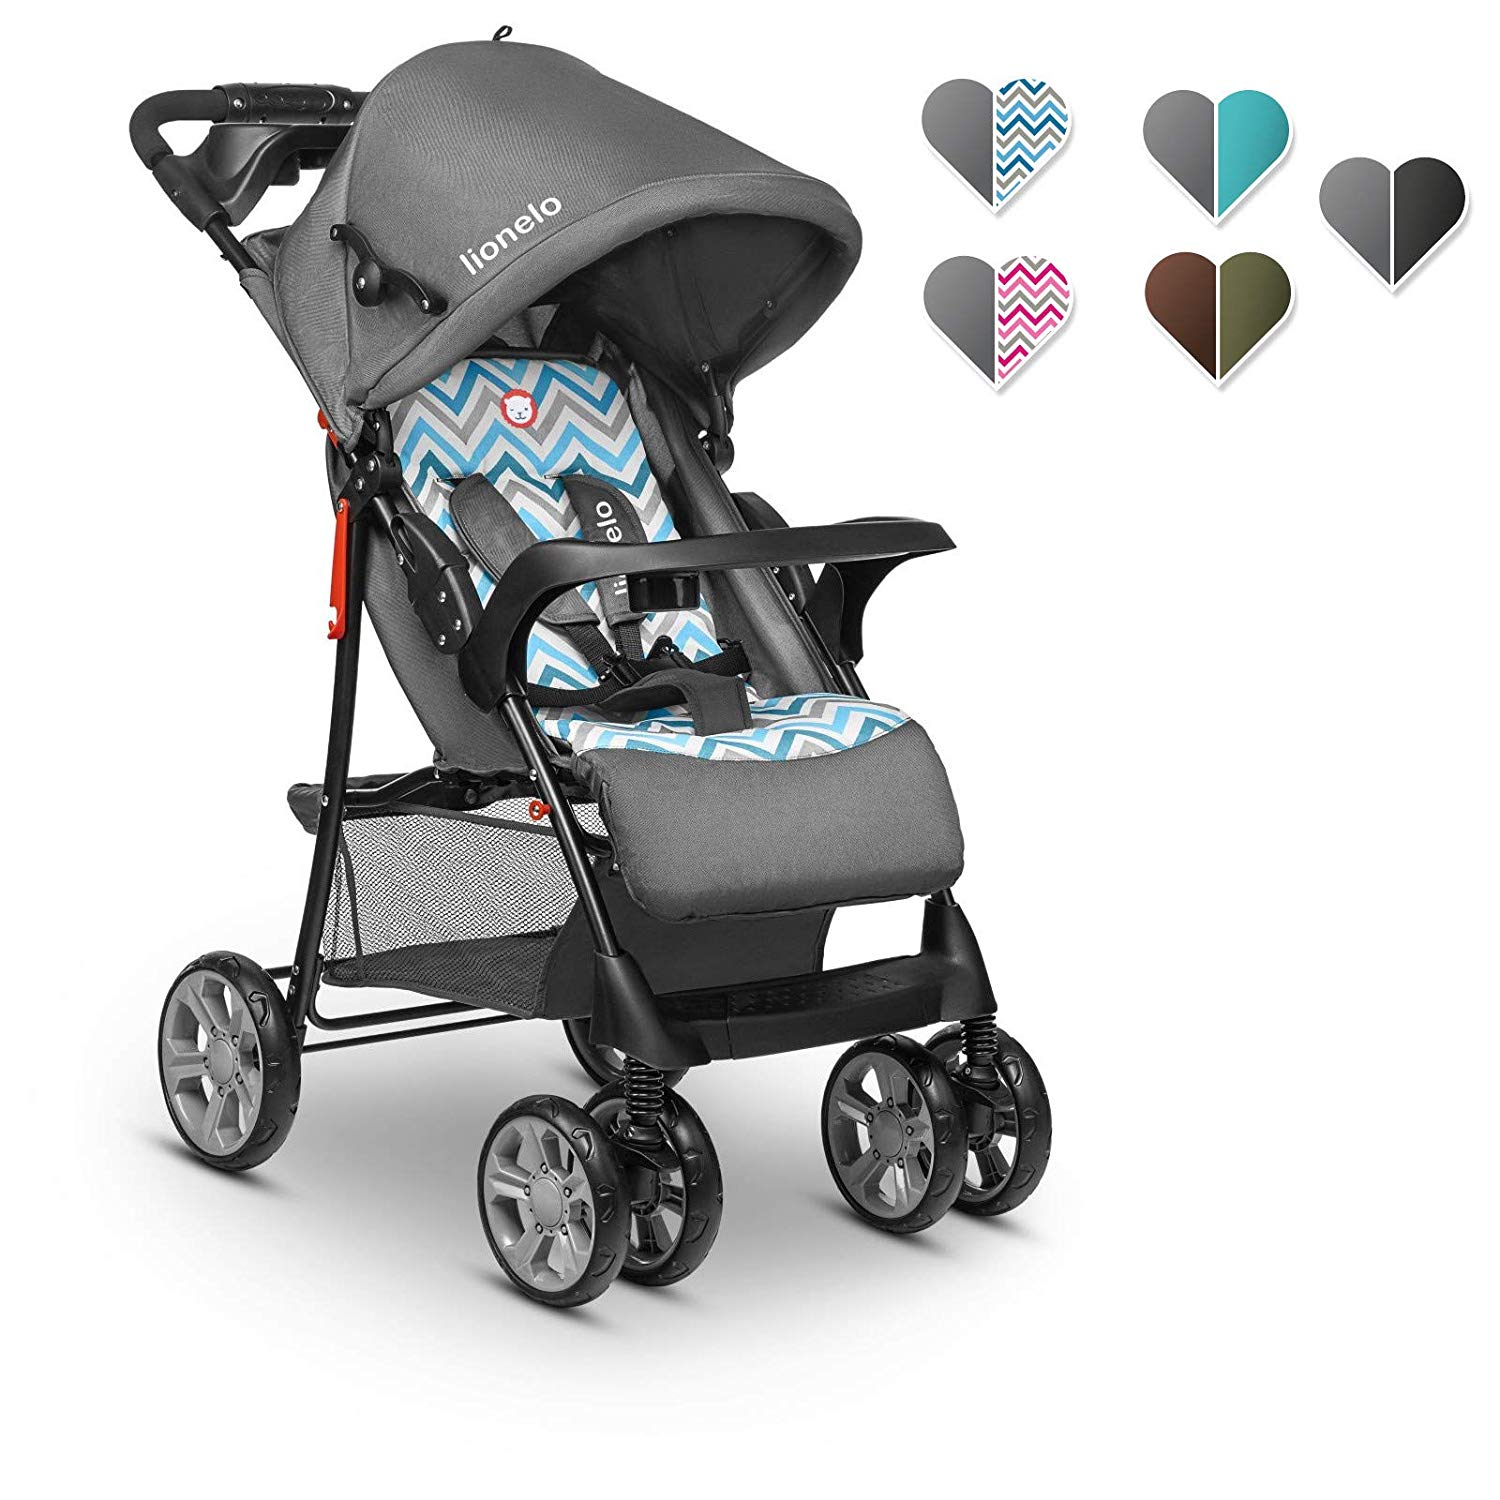 Lionelo Emma Plus Pushchair Lightweight Modern Small Buggy with Reclining Position Foldable